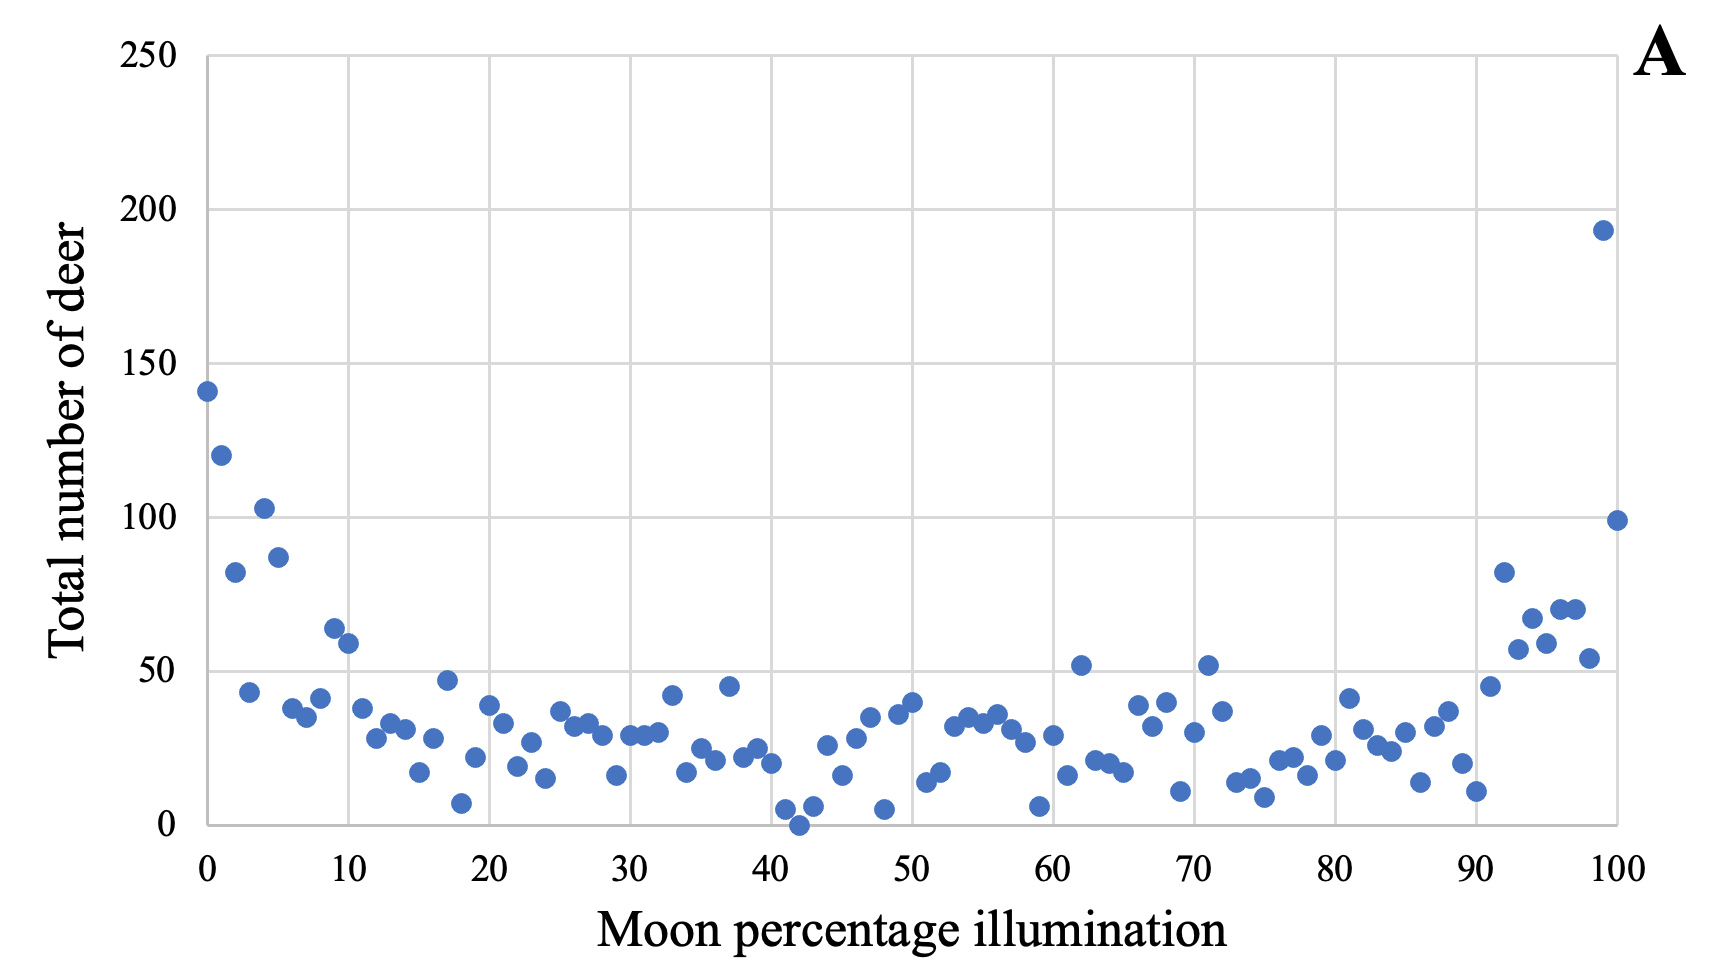 Two Researchers Ran an Experiment to Test Hunters’ Beliefs on Deer Movement, Weather, and Moon Phase. Here’s What They Found